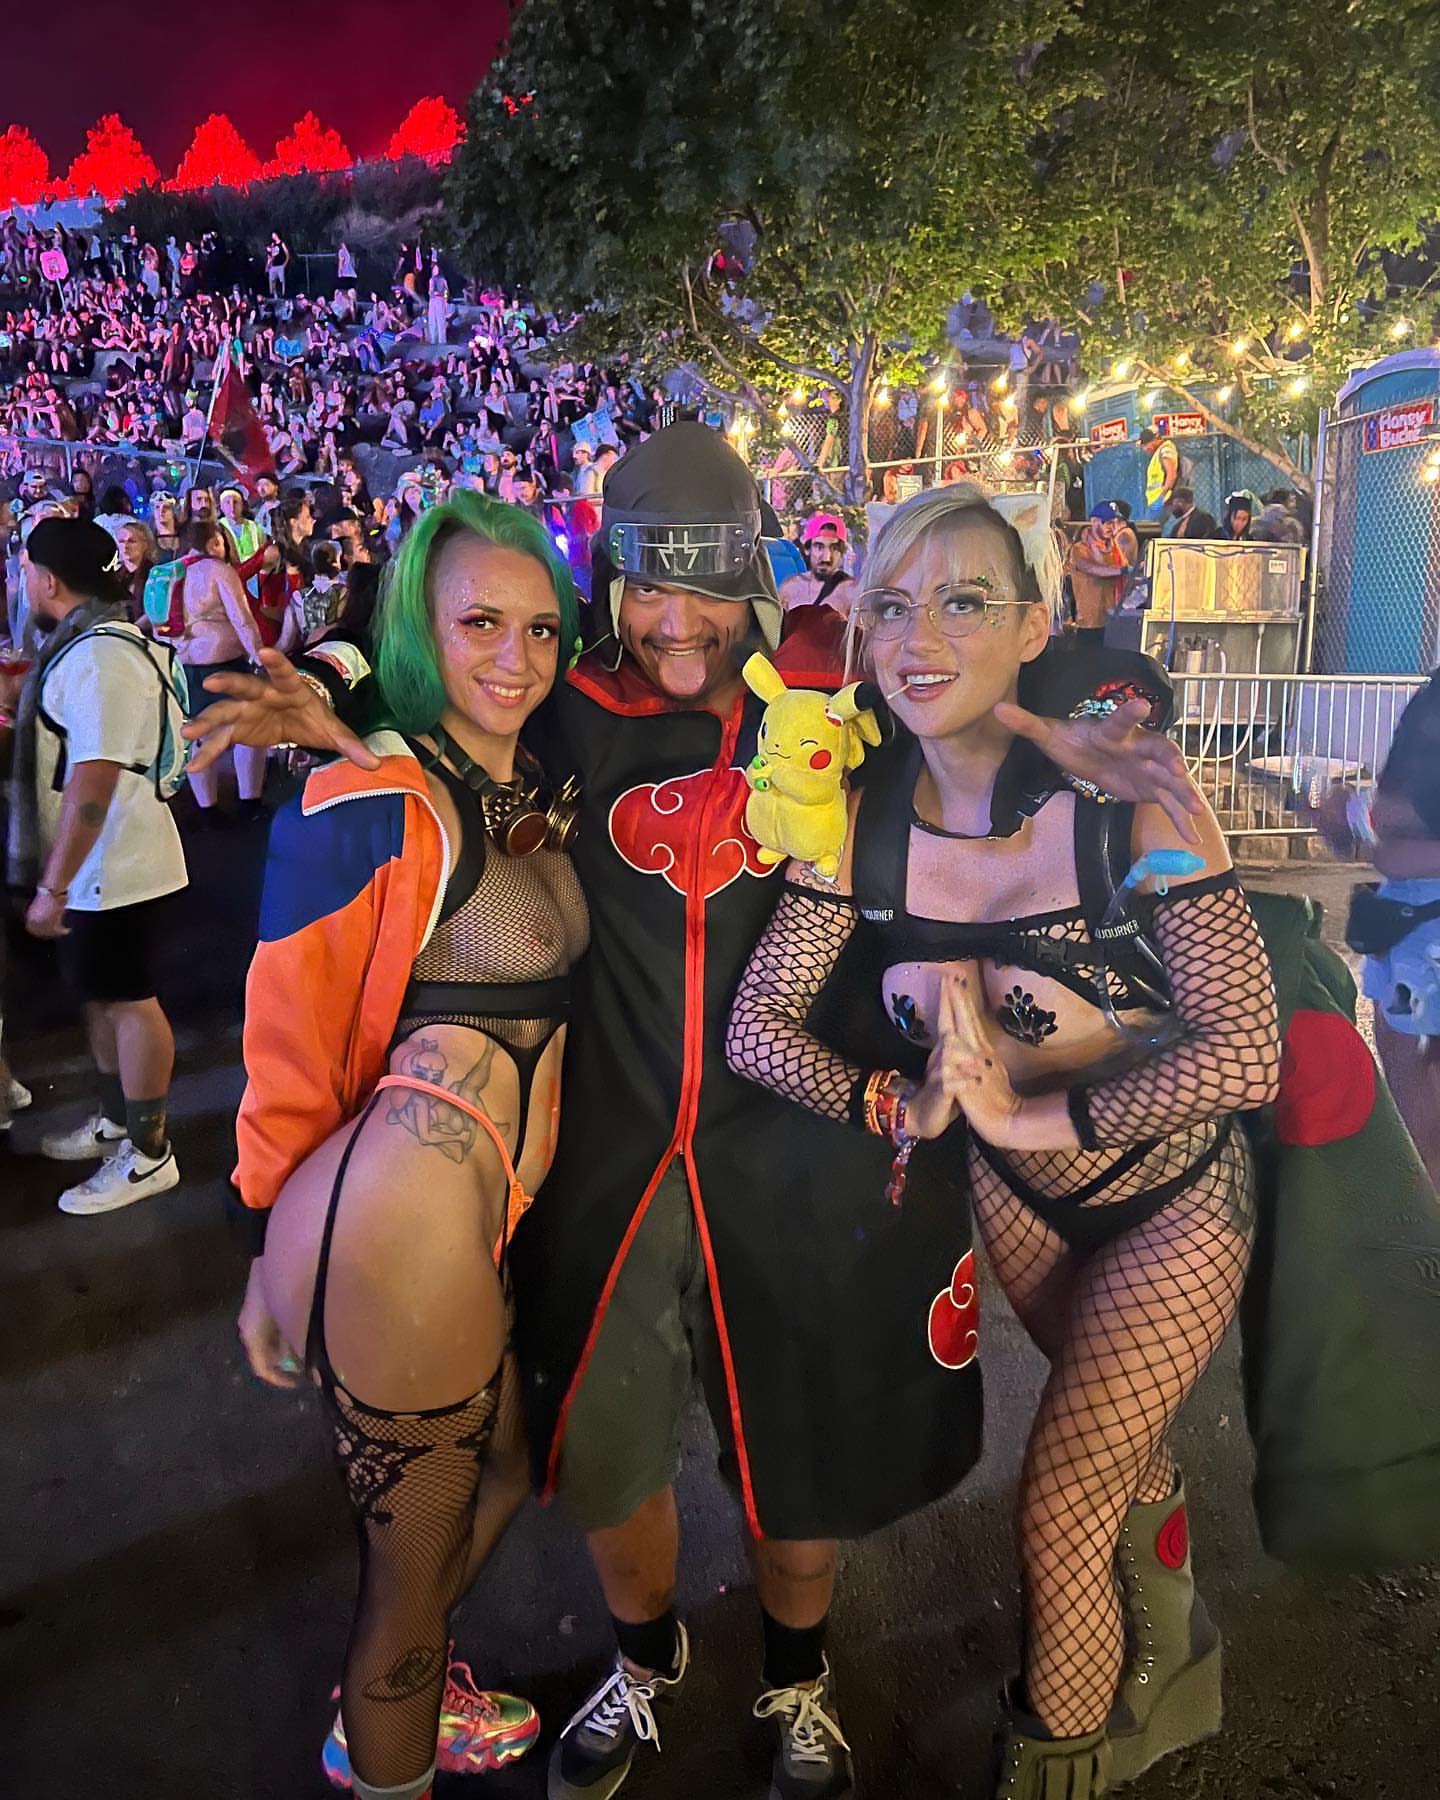 ✨KITTIES FIRST RAVE✨
DAY TWO: Naruto theme🙌🏼 it was so fun to meet a bunch of other nerds and get to party with them. The smoke had rolled in that day so it was kinda hard to breathe, but once I started hanging out with my friend Molly, everything was great😄
Amazing music, beautiful people, loving energy. Couldn’t have asked for a better time💕
What themed outfit would you want to wear??
•
•
•
#rave #festival #firstrave #basscanyon #basscanyon2023 #thegorge #thegorgeamphitheater #naruto #narutofans #saturdaysareforthegirls